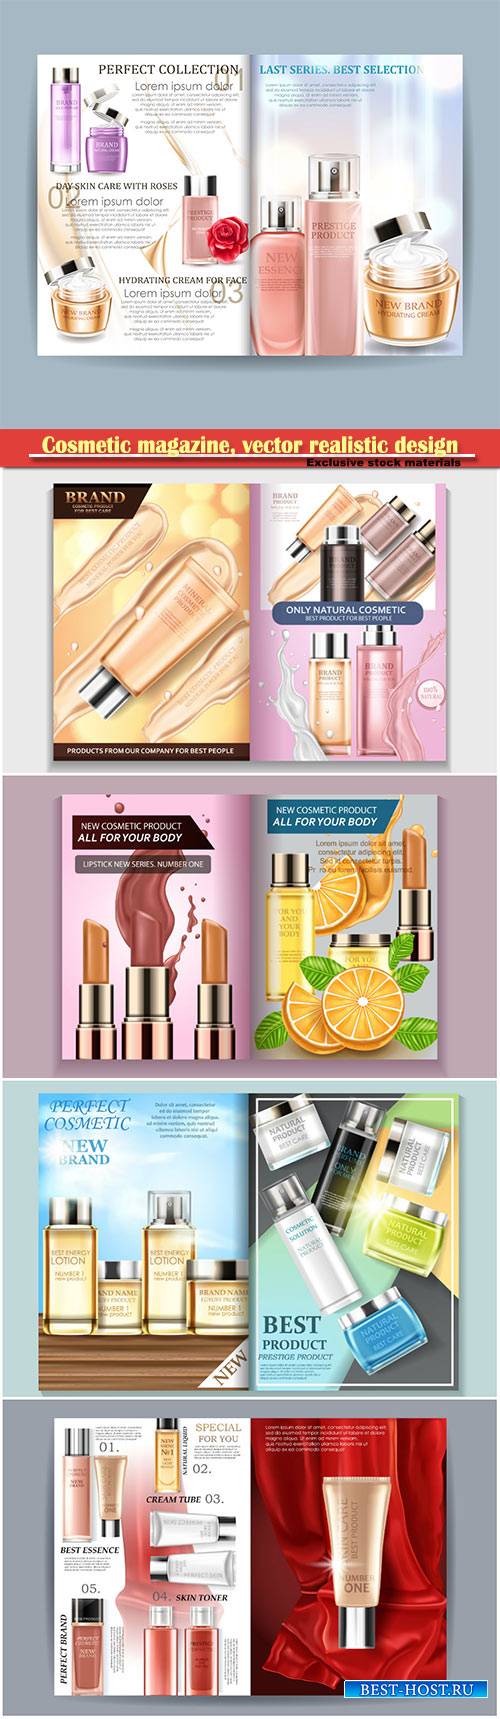 Cosmetic magazine, vector realistic design for your projects